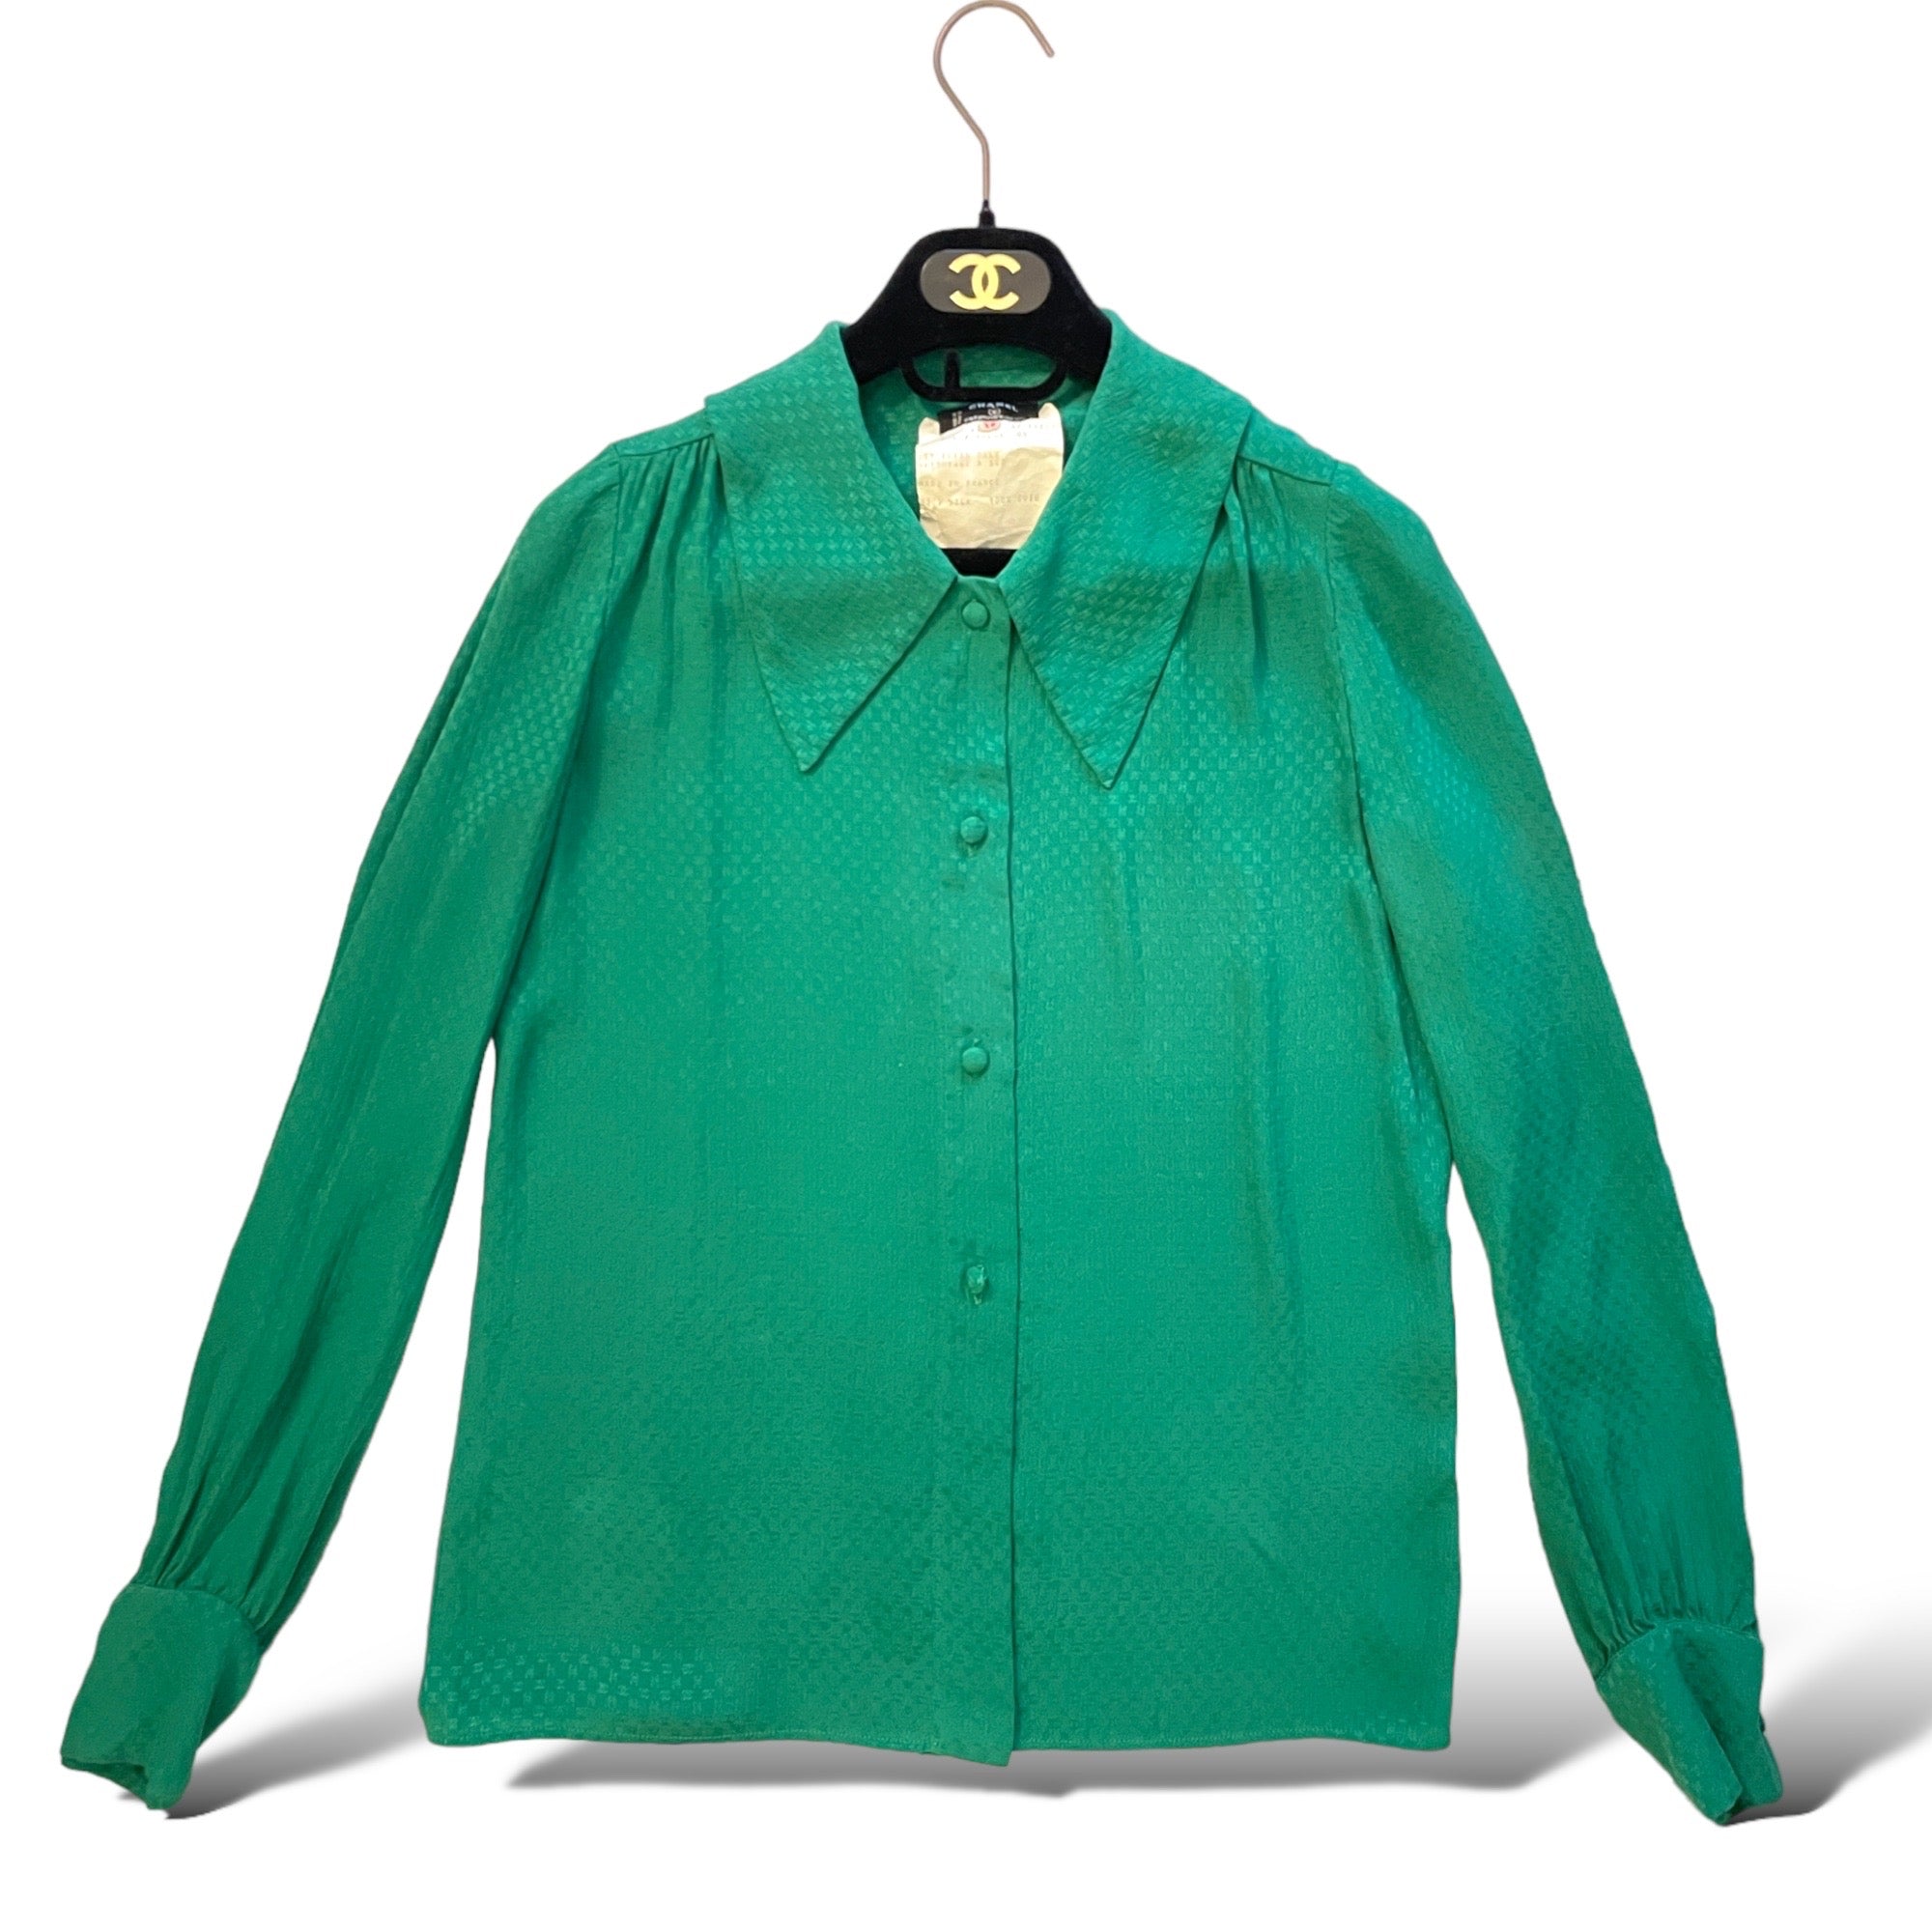 EXTREMELY RARE CHANEL Vintage STUNNING Emerald Green CC Logo Print Blouse